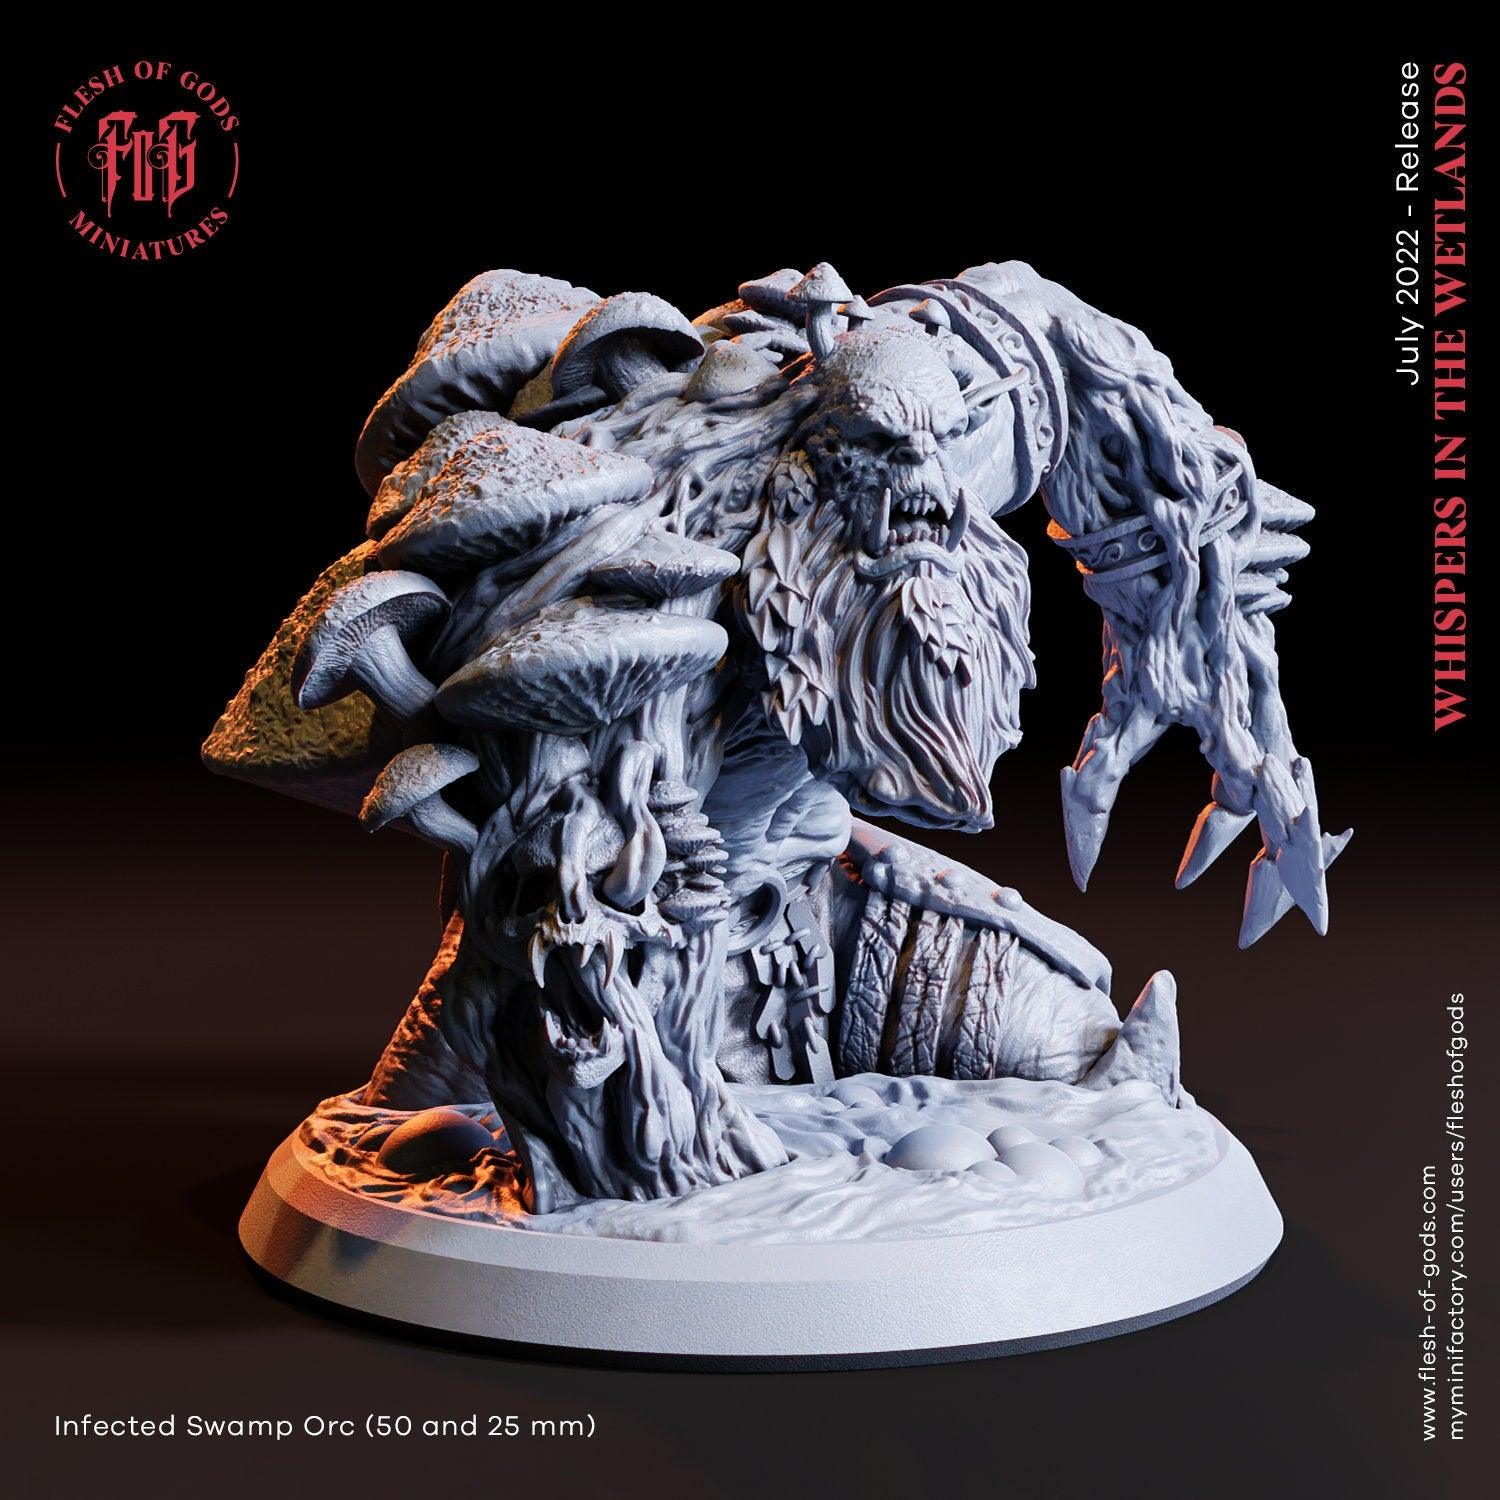 Infected Swamp Orc Miniature Ogre Giant Miniature Swamp Monster 50mm Base | DnD Miniature Dungeons and Dragons statue - Plague Miniatures shop for DnD Miniatures